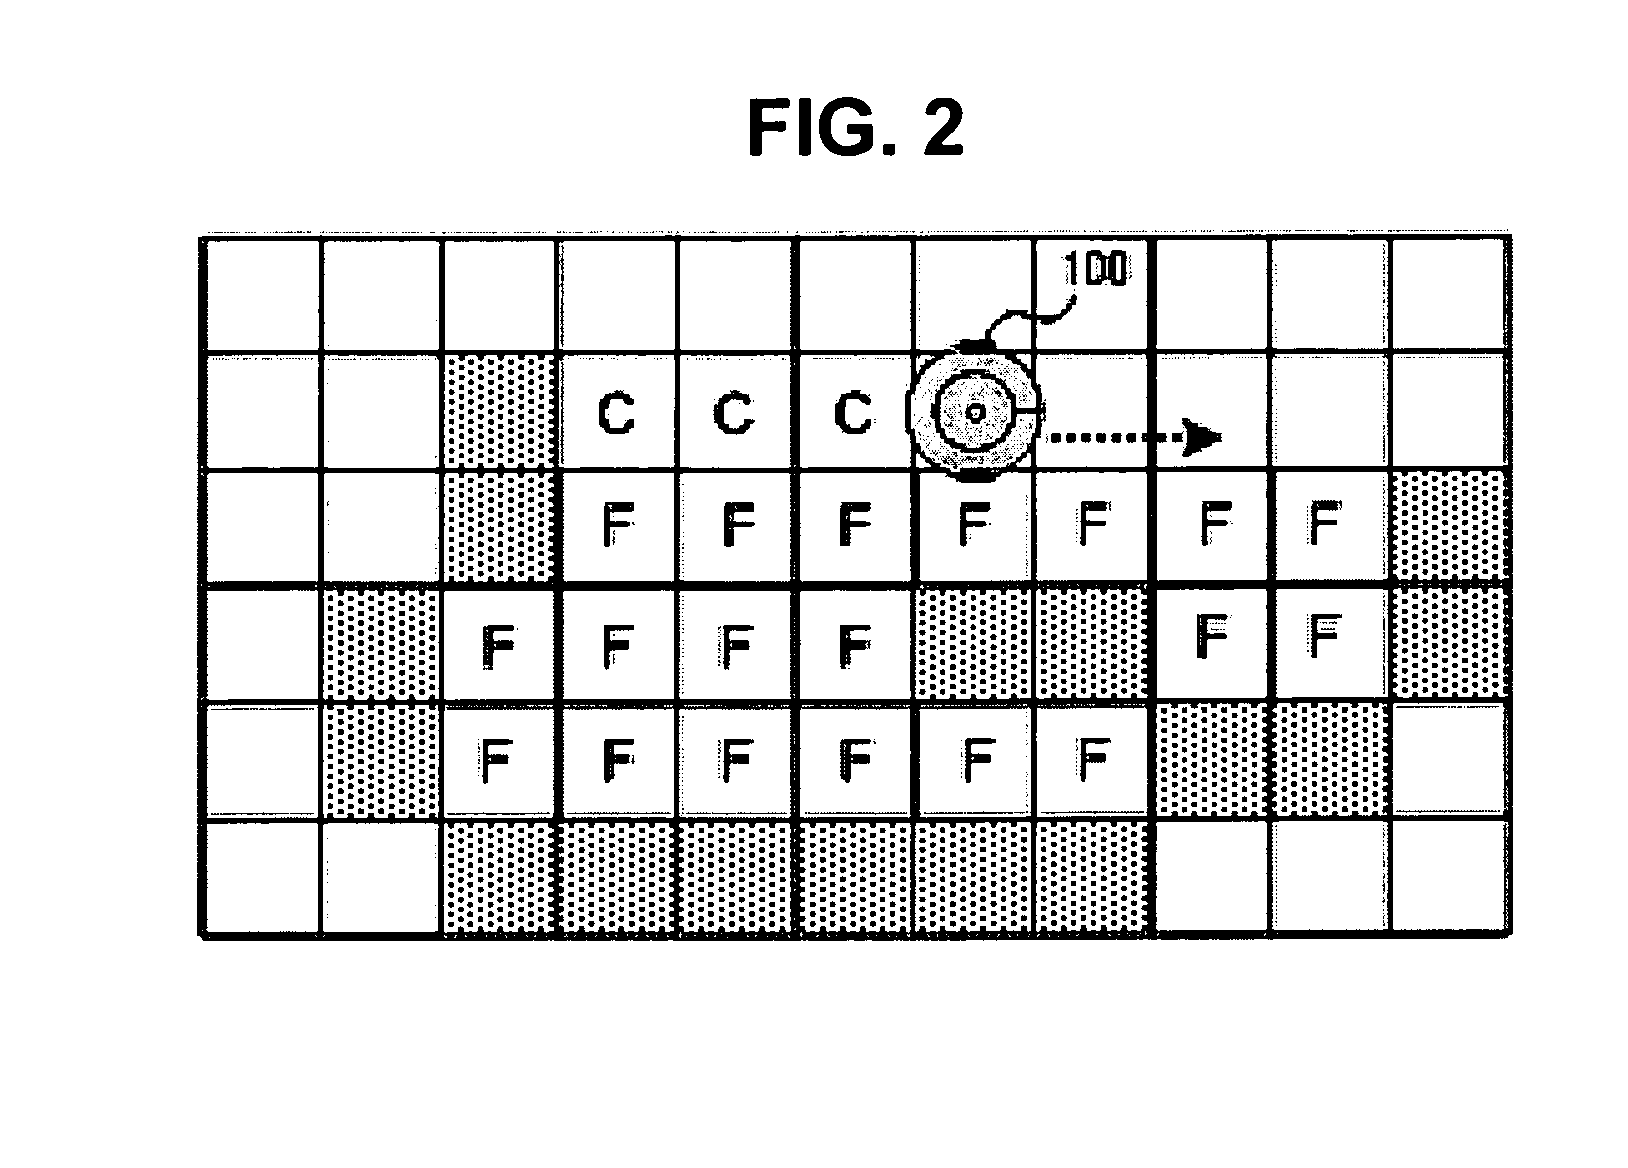 Method and apparatus for planning path of mobile robot